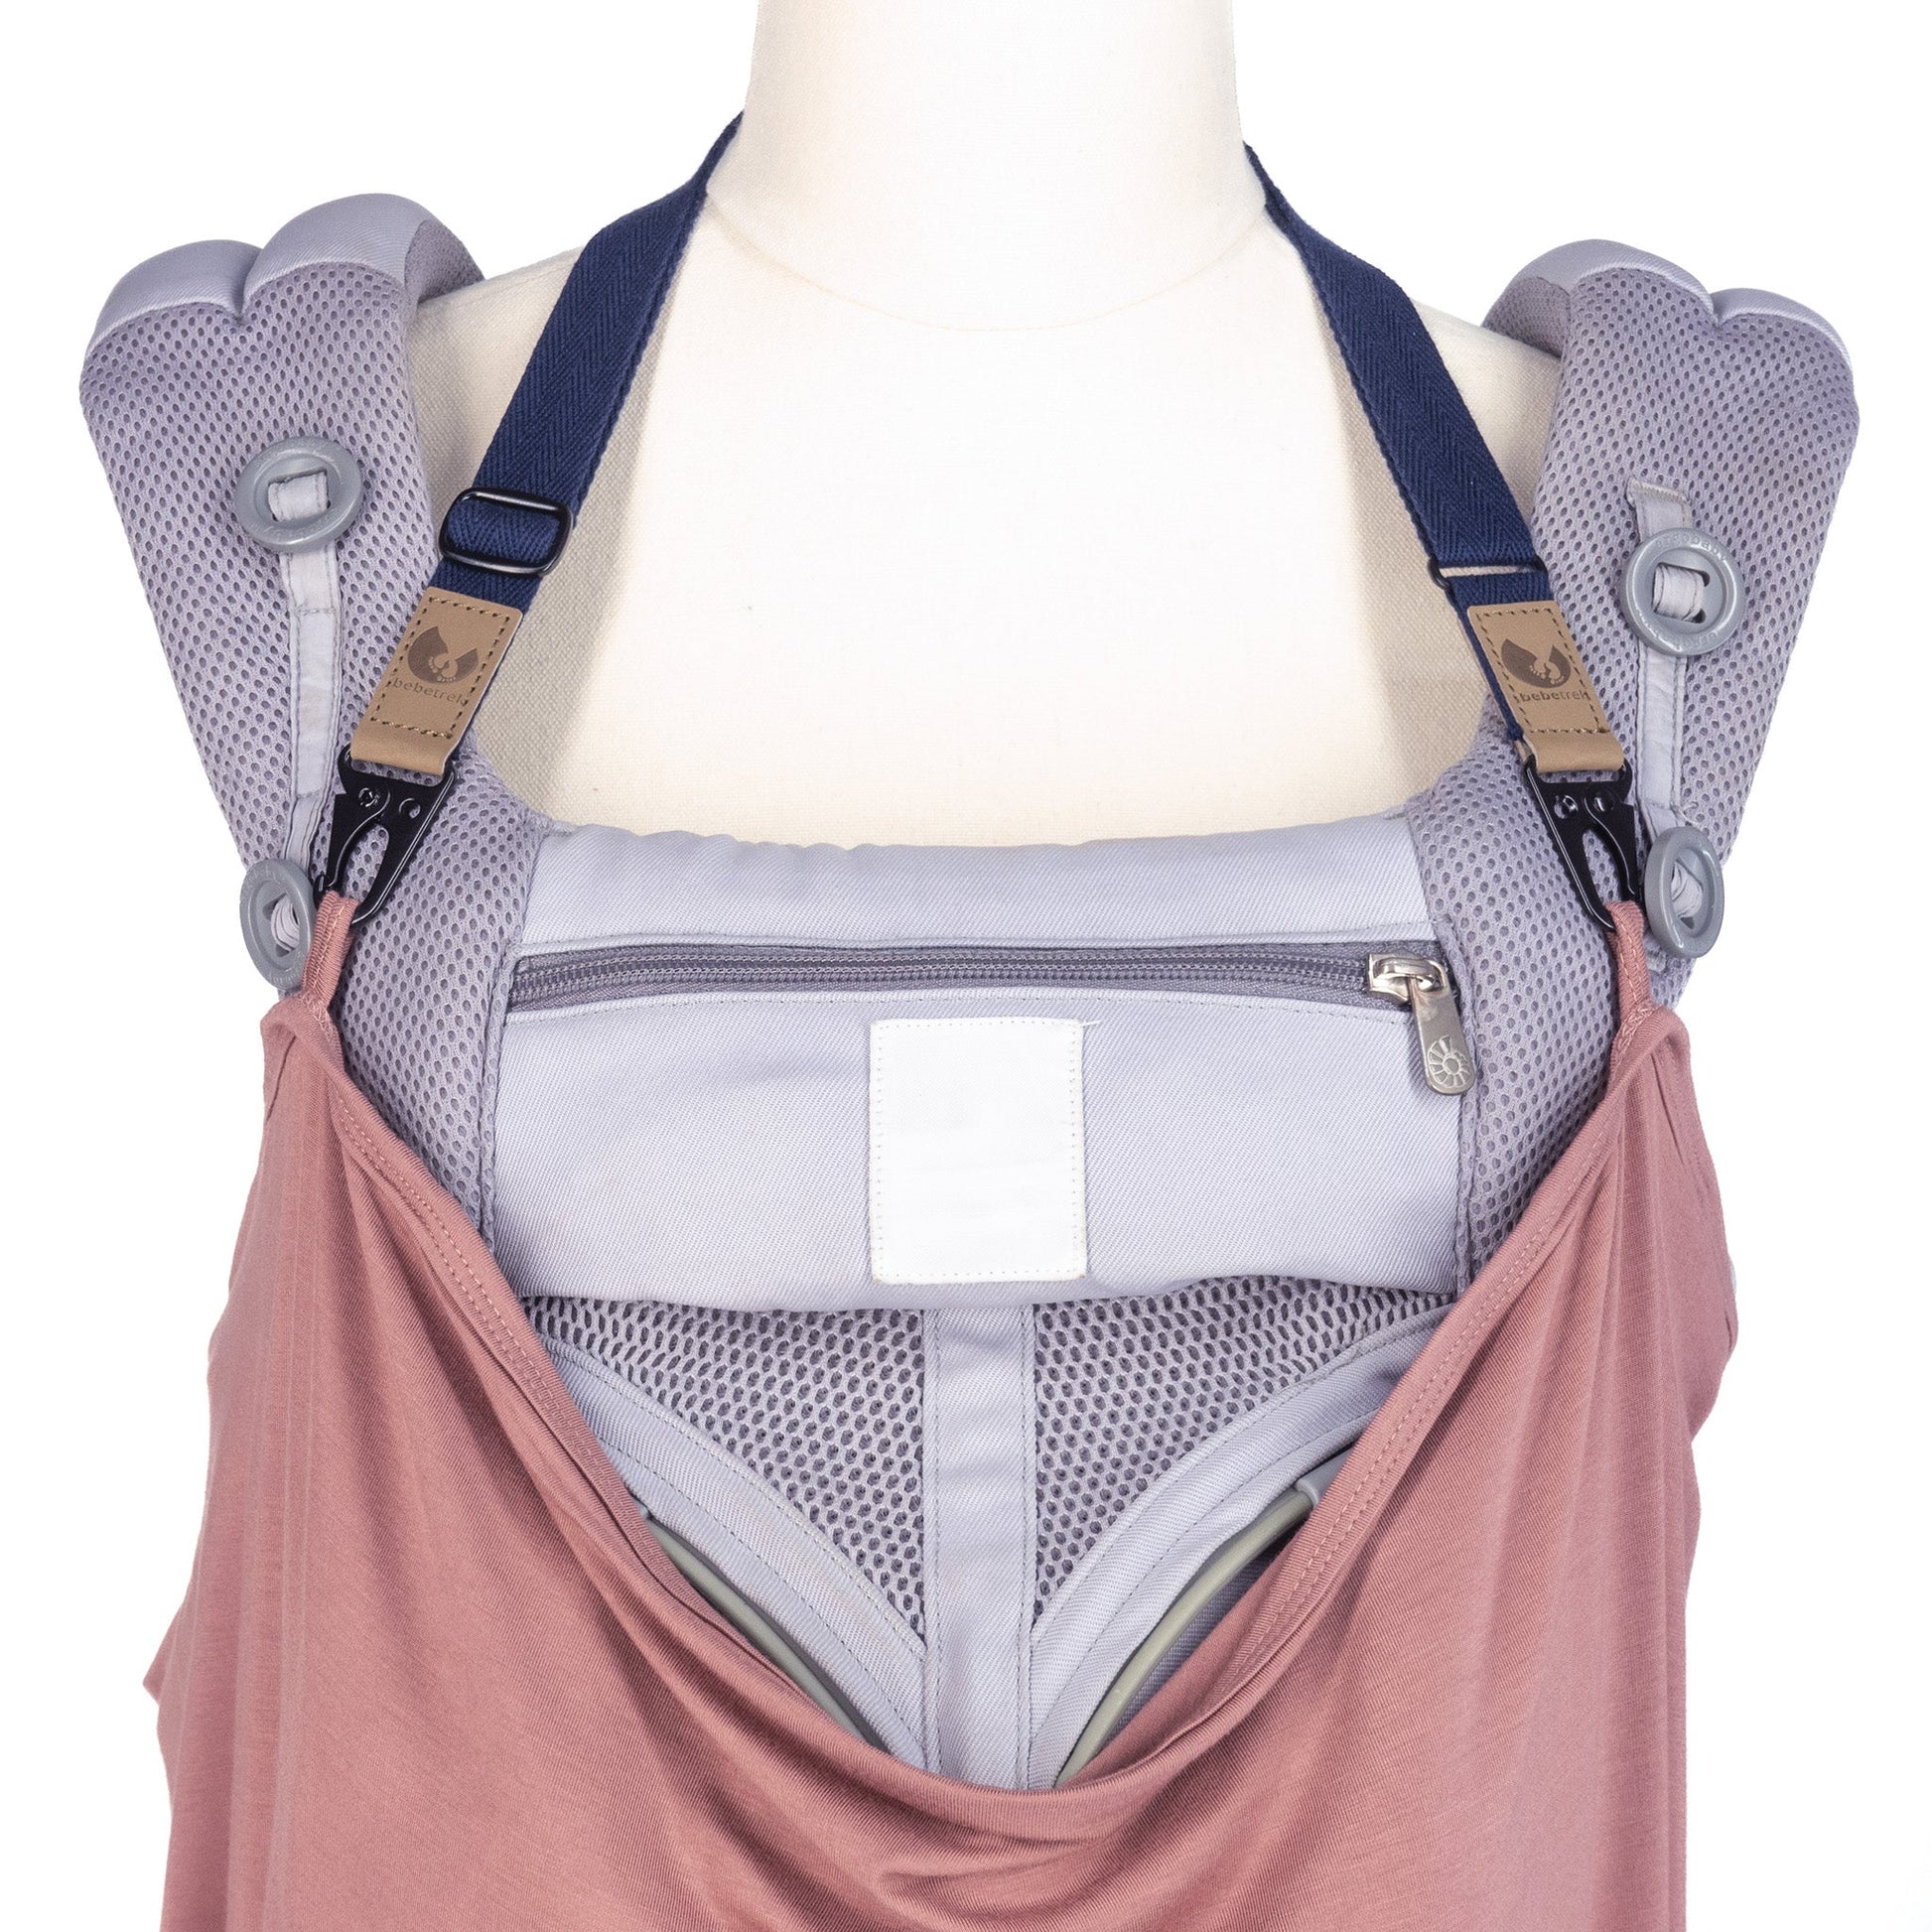 The Multifunctional magnetic sun cover can be worn with the adjustable straps